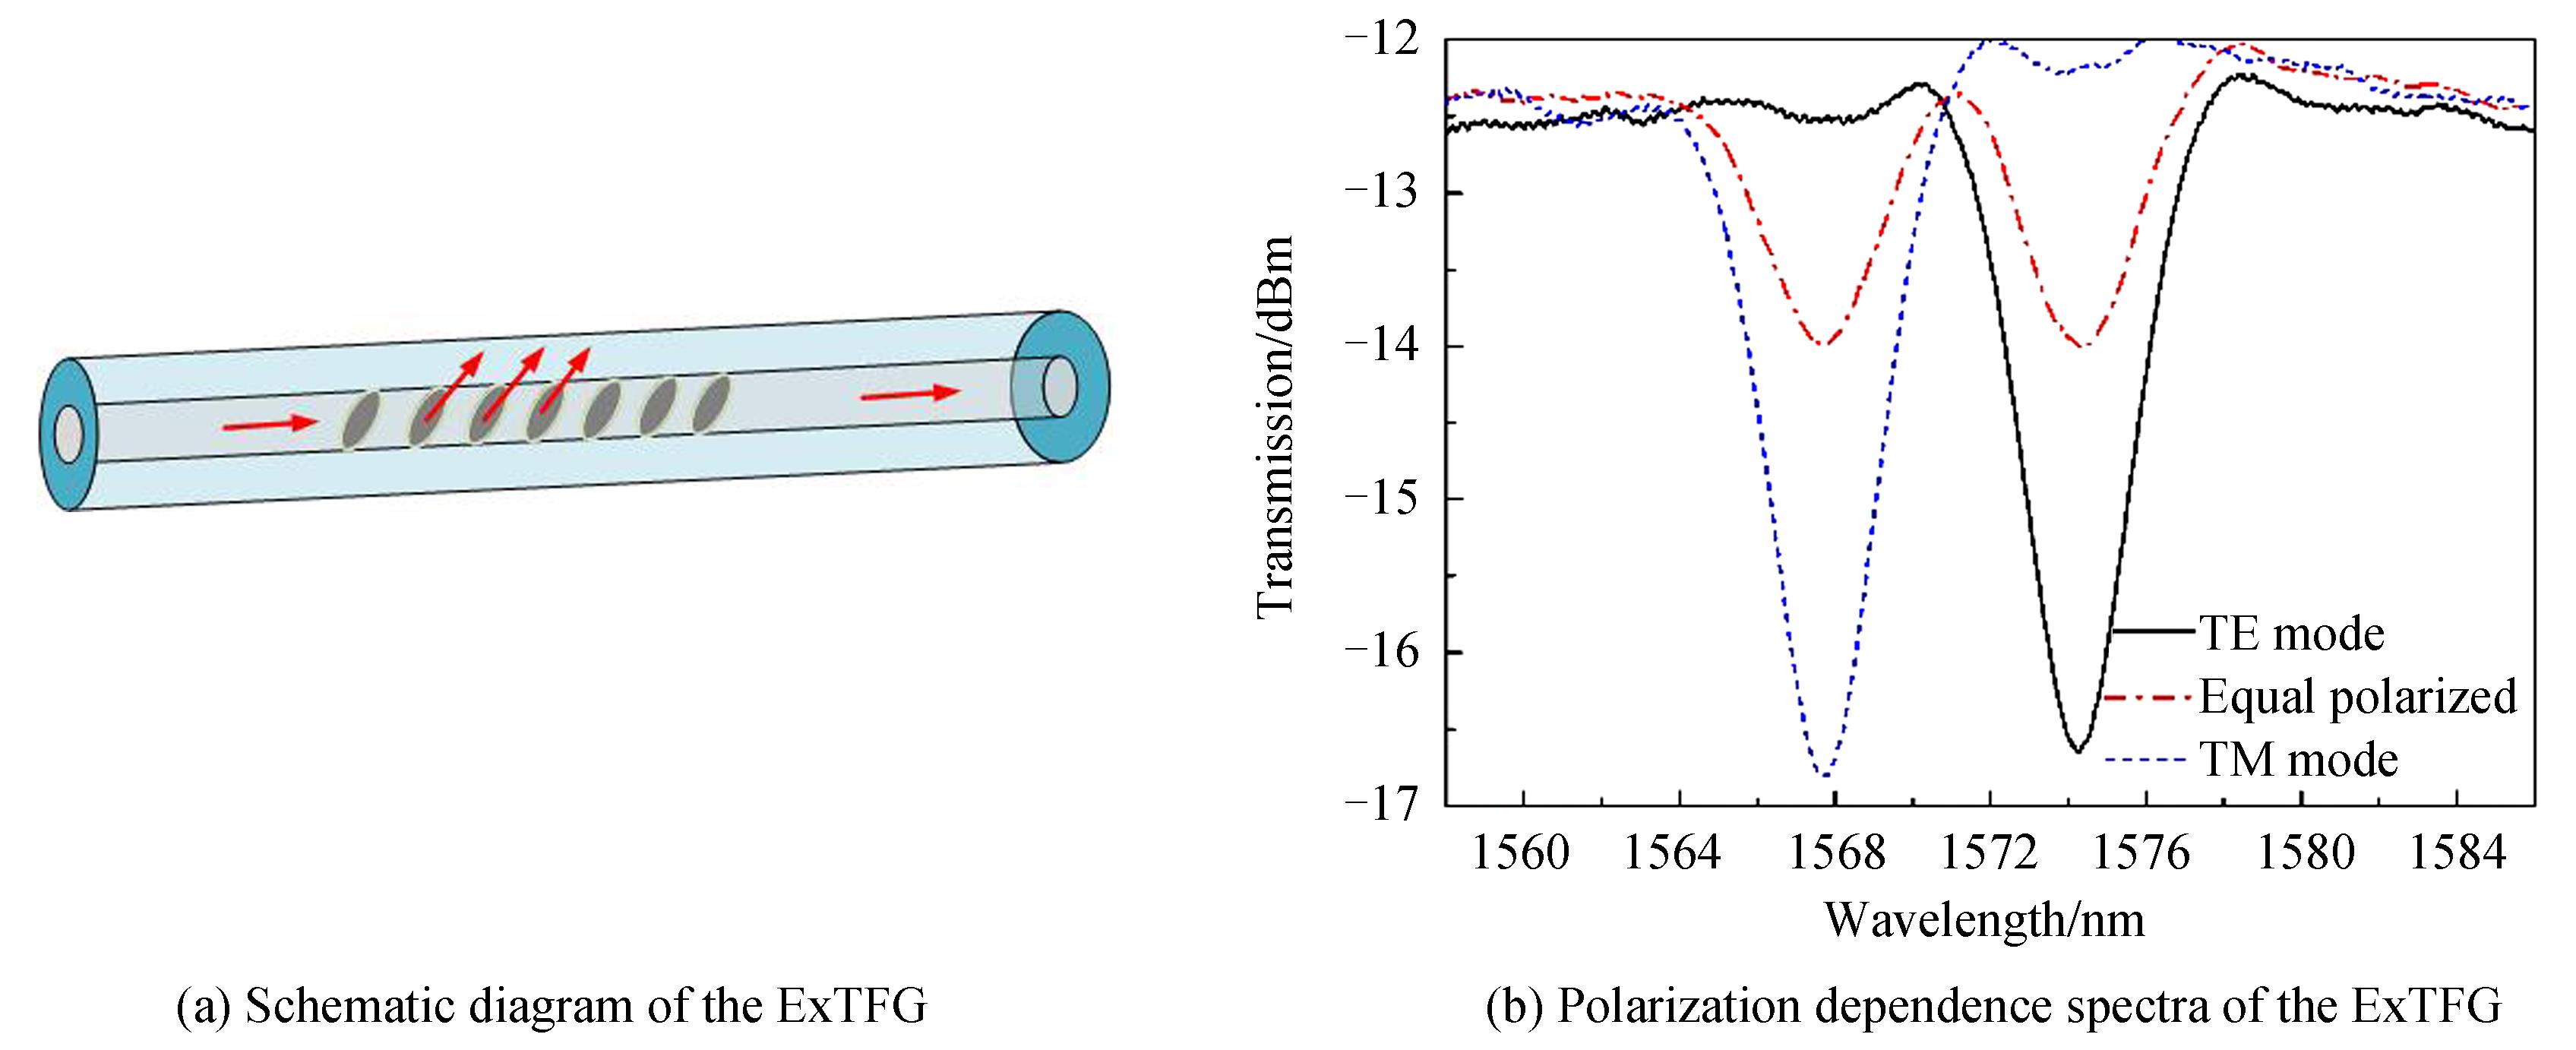 Schematic diagram and polarization dependence spectra of ExTFG